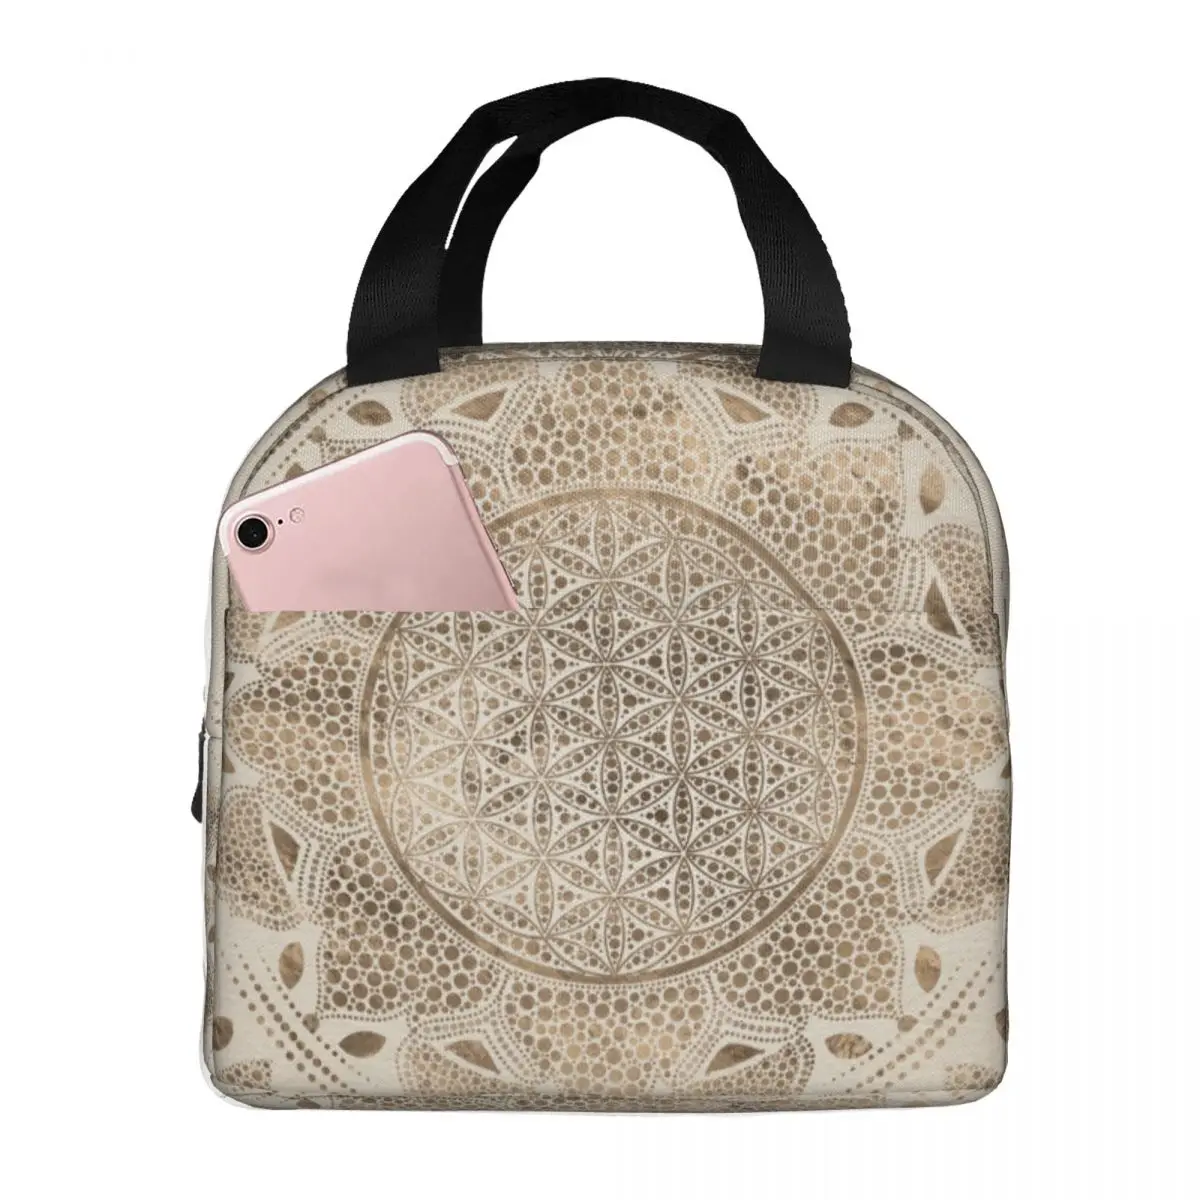 Mandala Lunch Bag Waterproof Insulated Canvas Cooler Thermal Picnic Travel Lunch Box for Women Kids